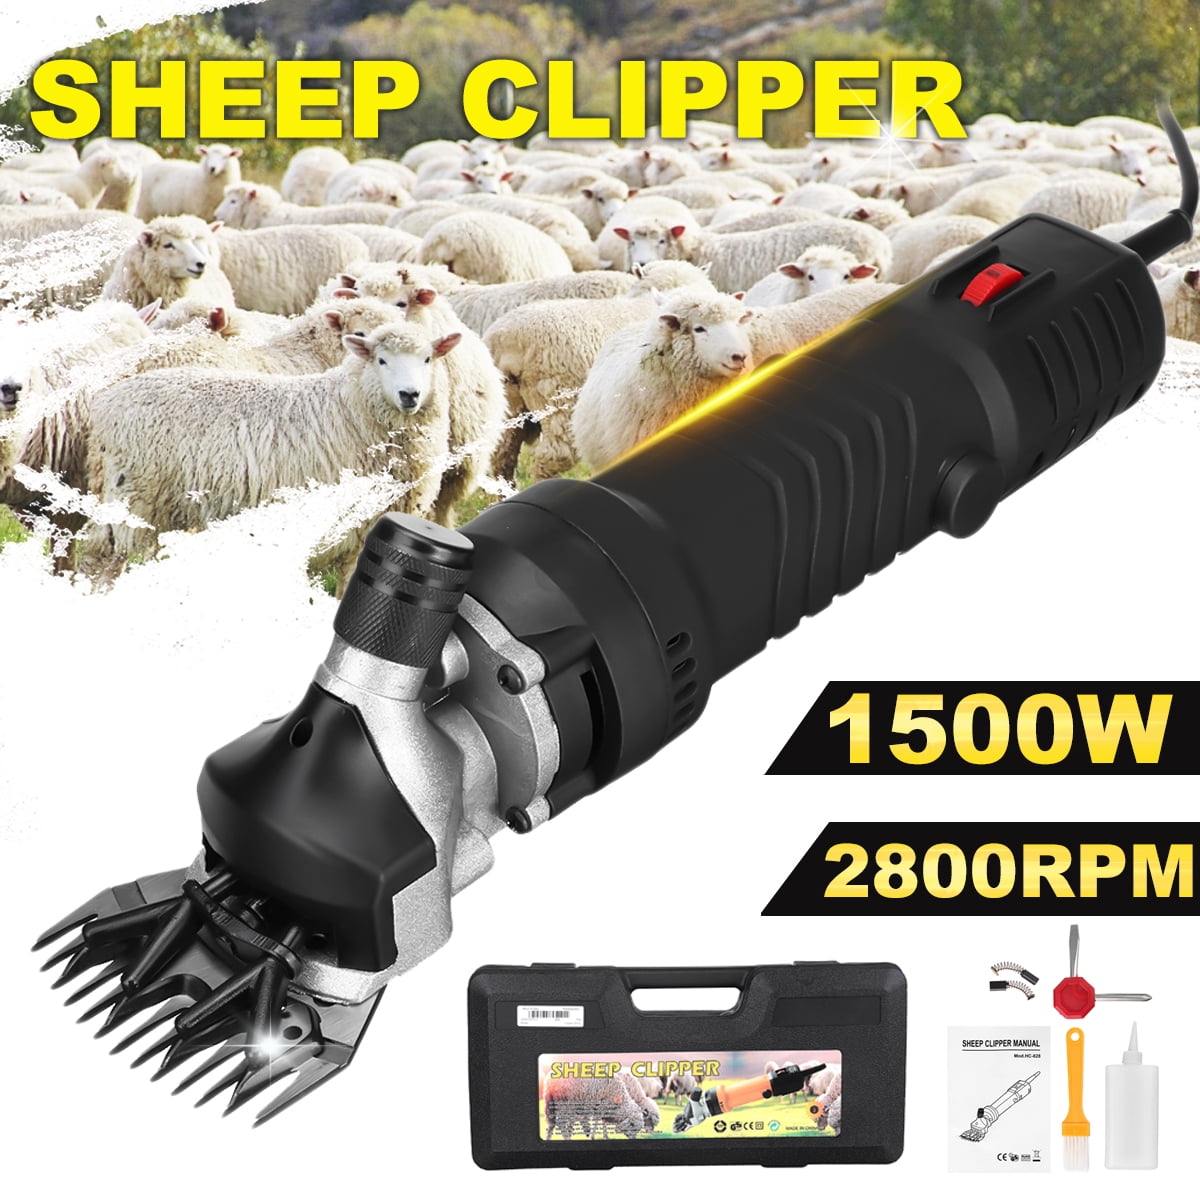 NEW Sheep Goat Shears Clippers Electric Animal Shave Grooming Farm Supplies 